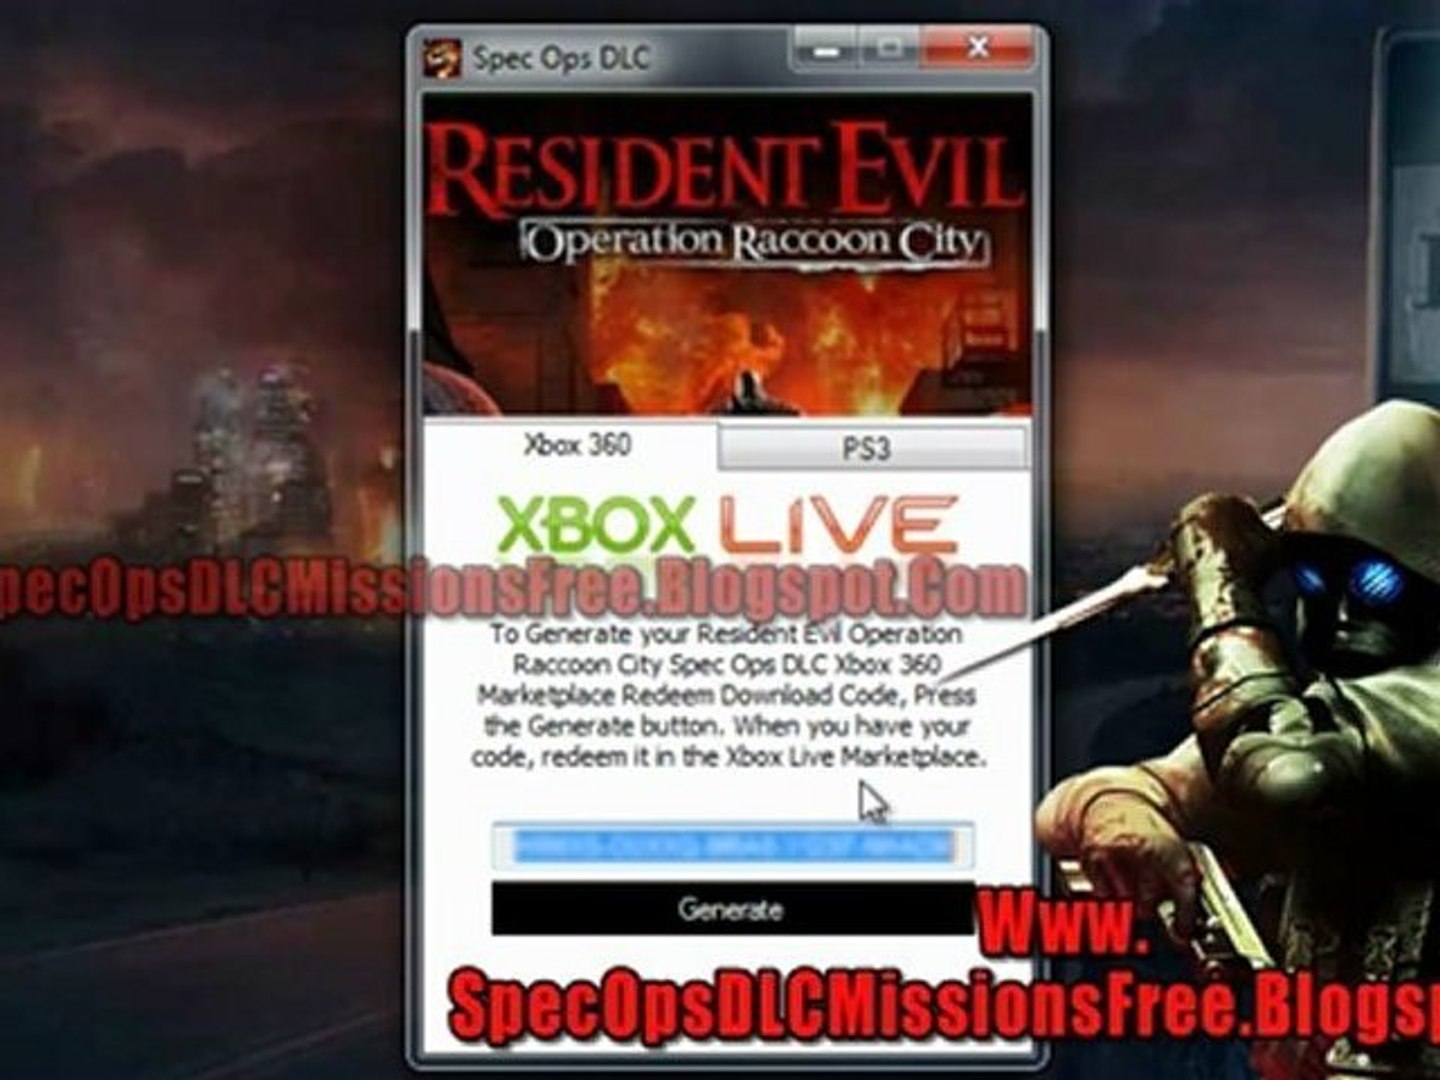 Resident Evil Operation Raccoon City Spec Ops DLC Missions Free on Xbox 360  And PS3 - video Dailymotion